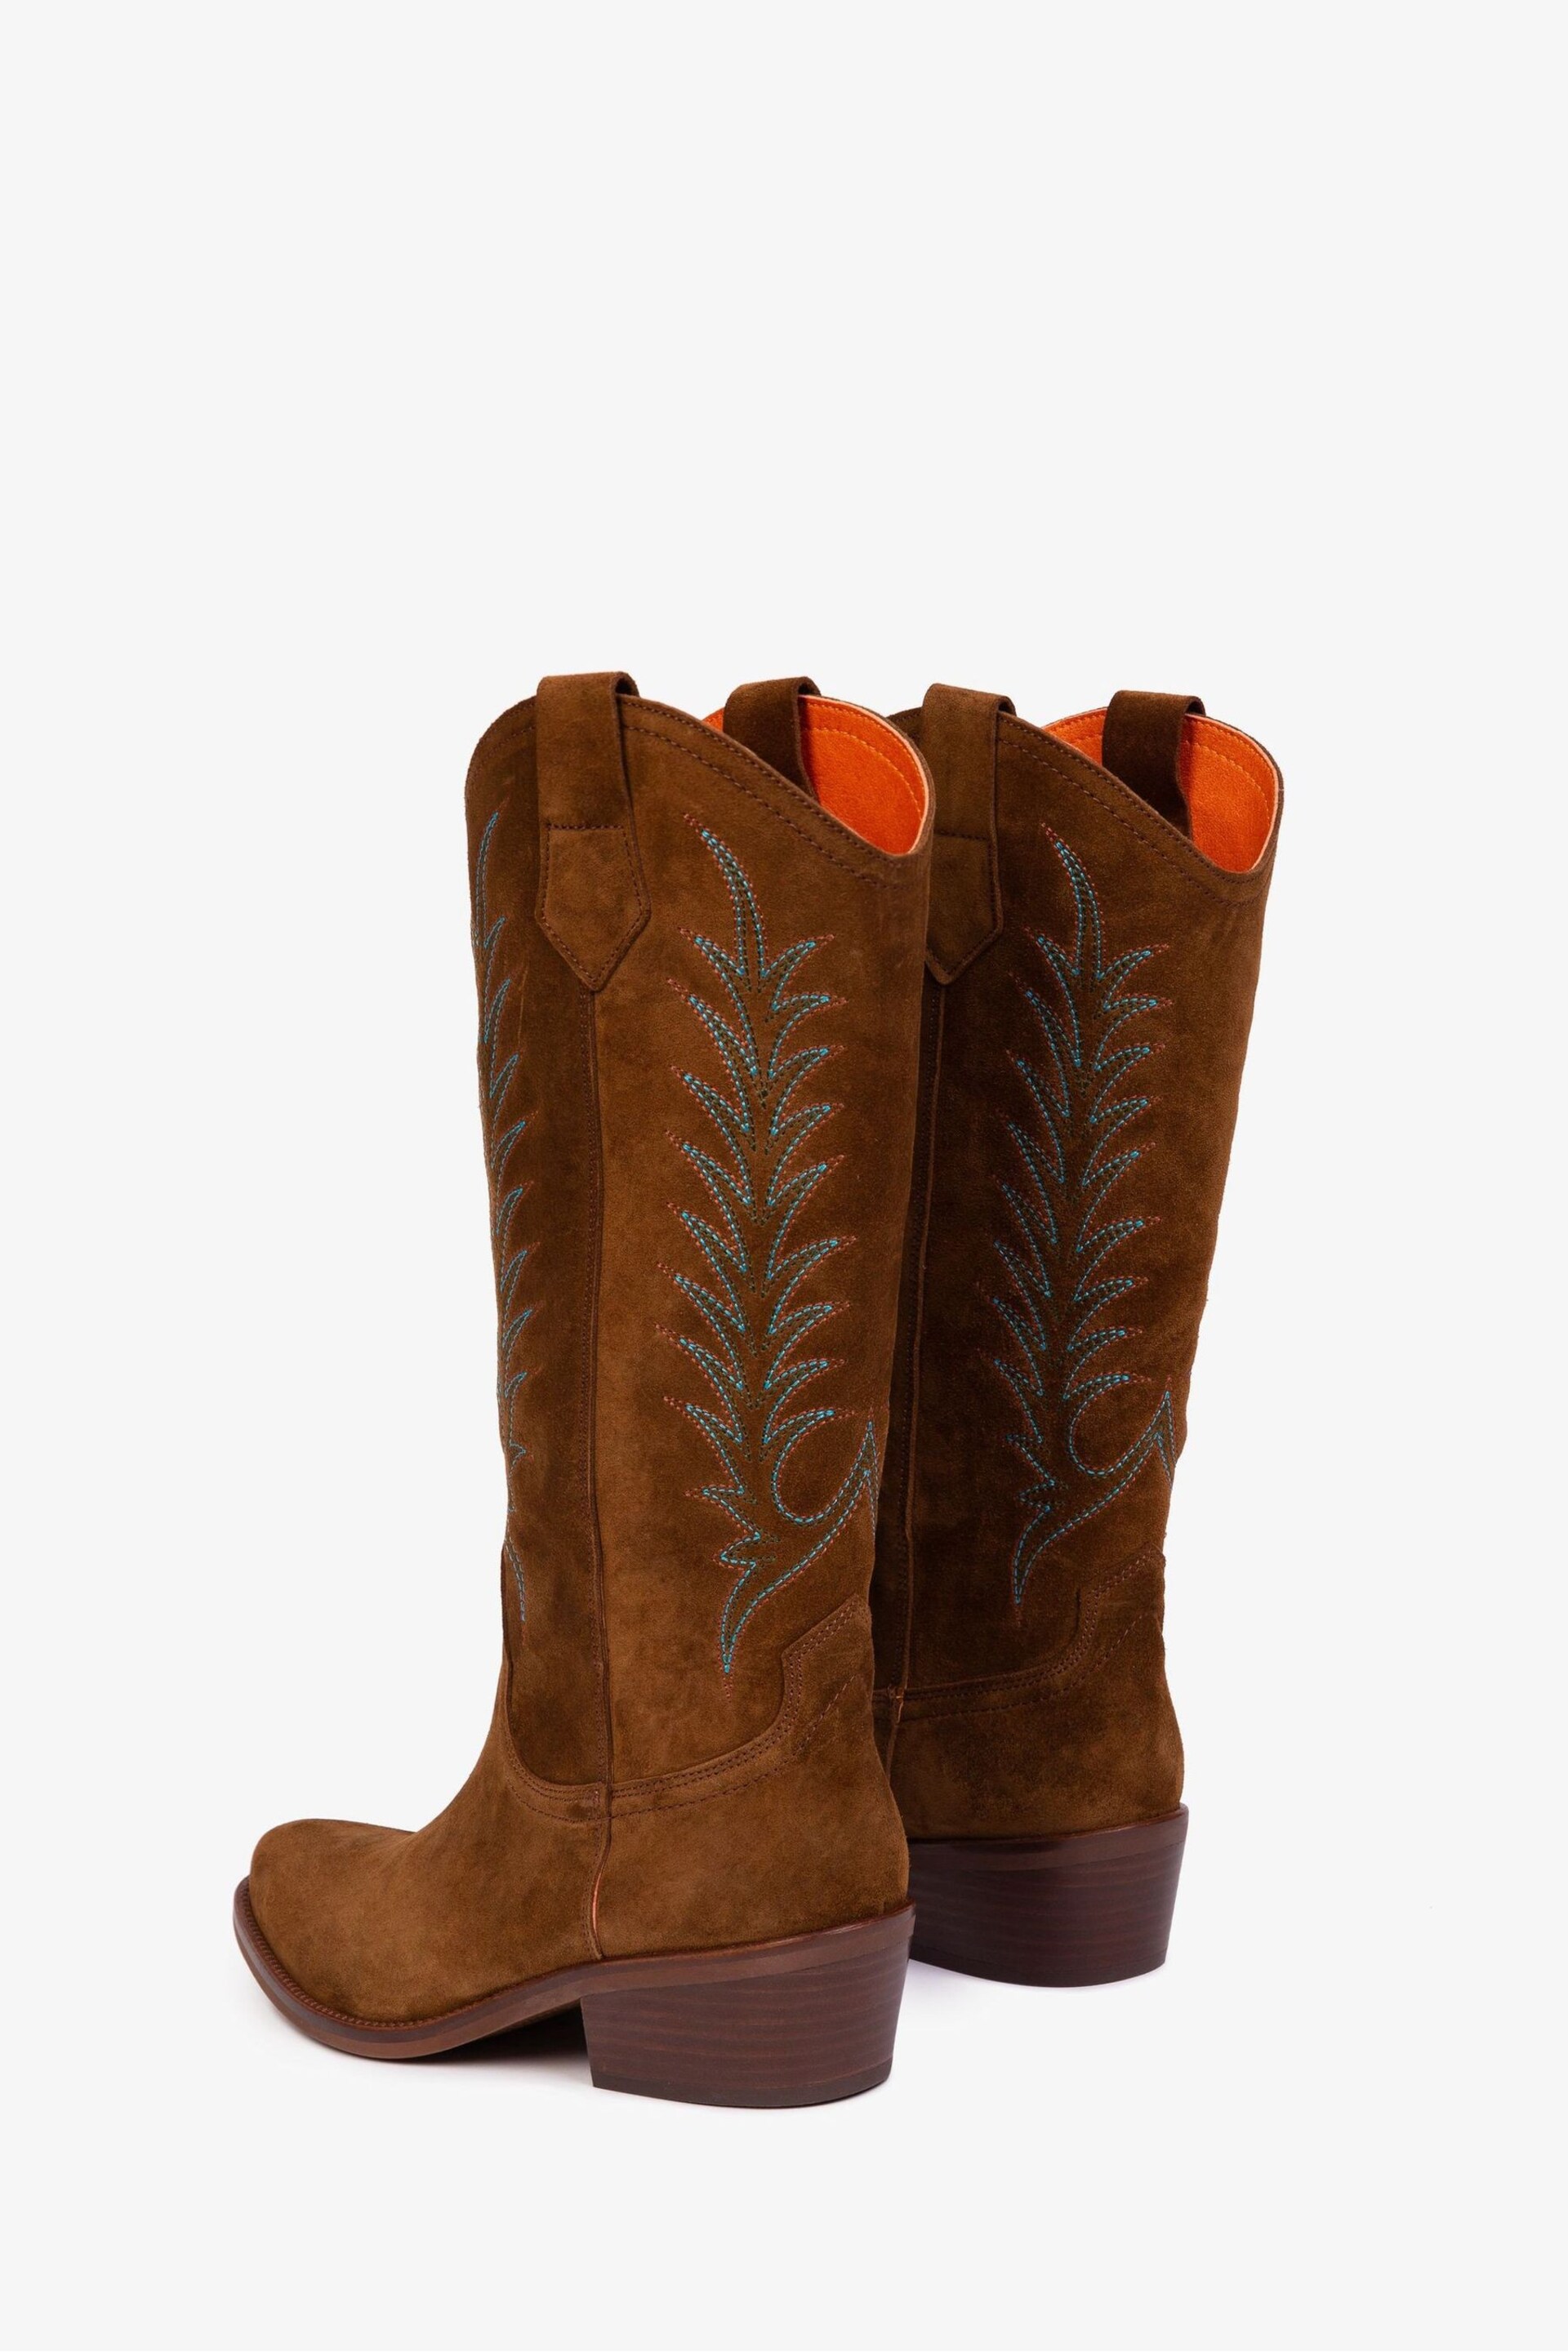 Penelope Chilvers Goldie Embroidered Cowboy Brown Boots - Image 13 of 16